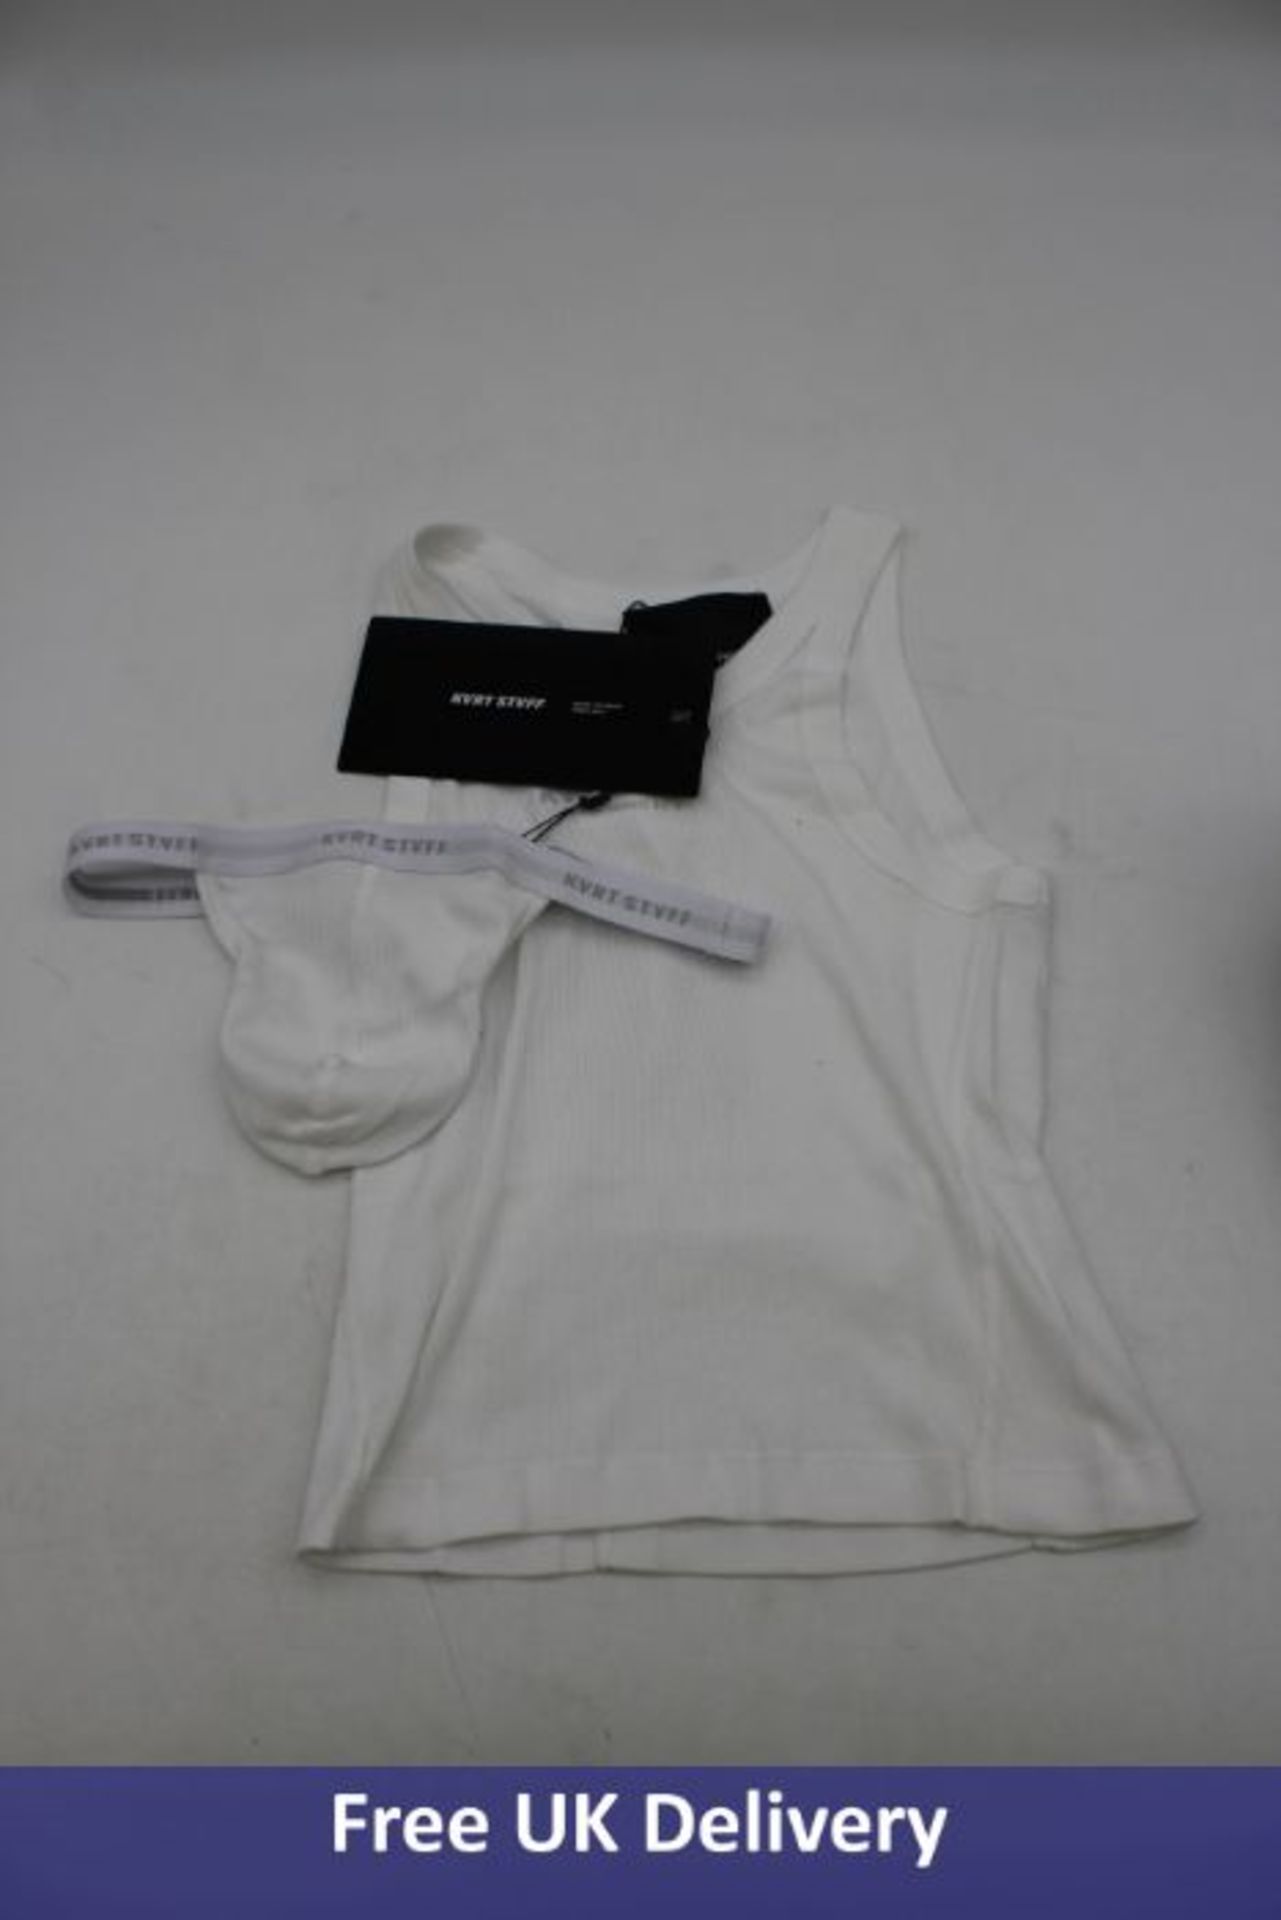 Kvrt Stvff Ready To Sweat Thong And Top, White, Extra Small